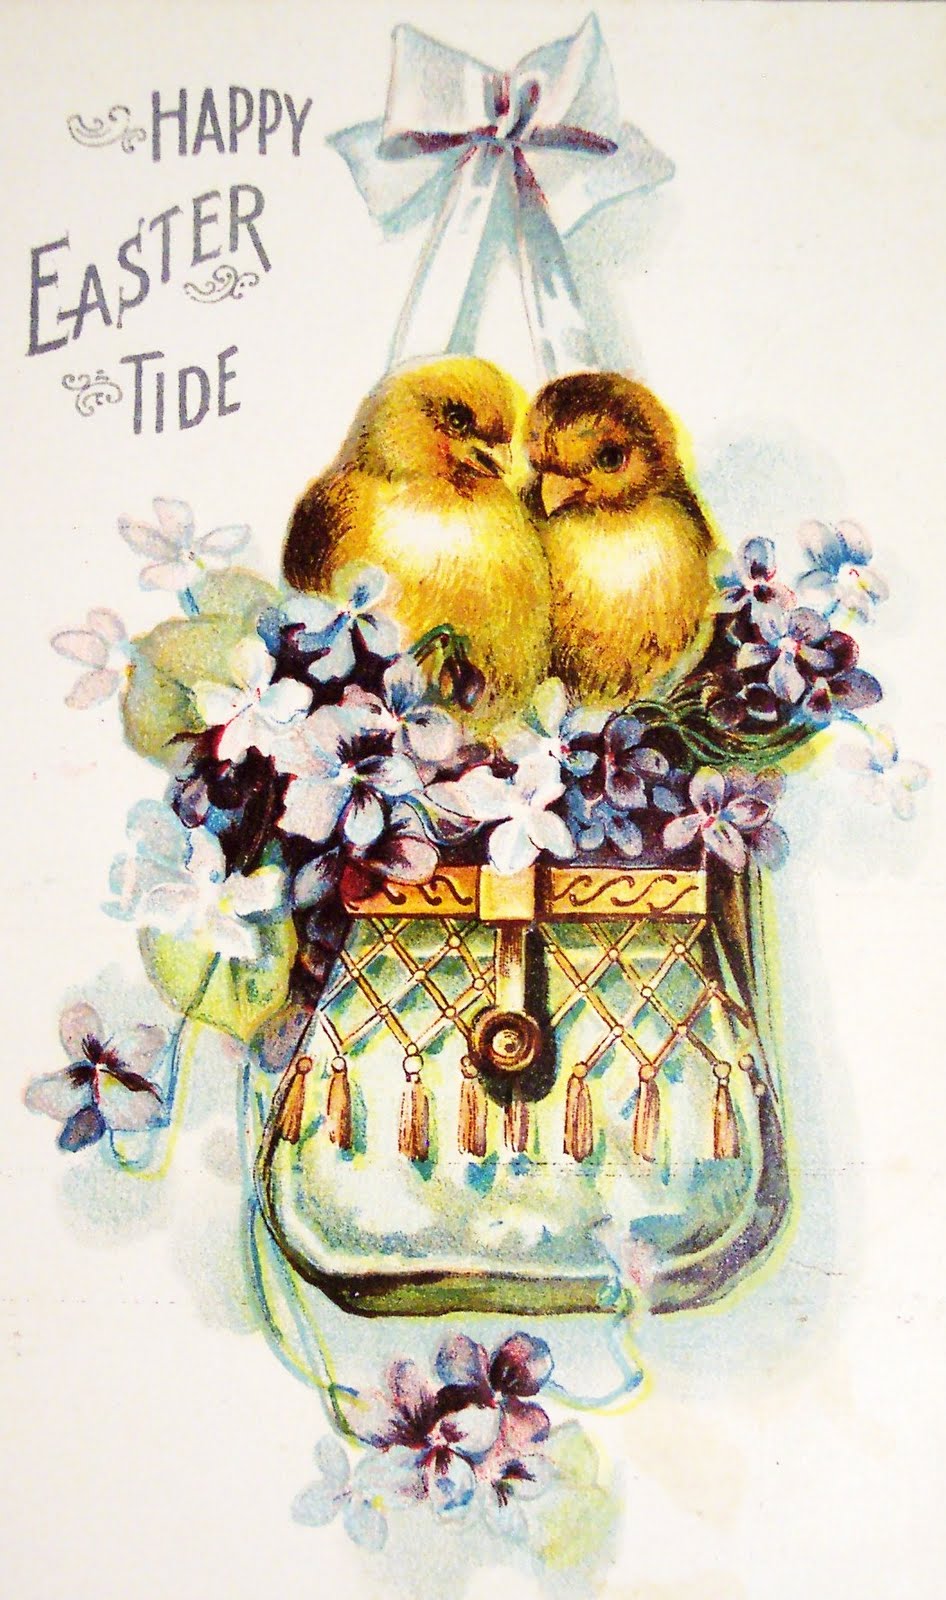 THE BEACH POST: Vintage Easter Cards